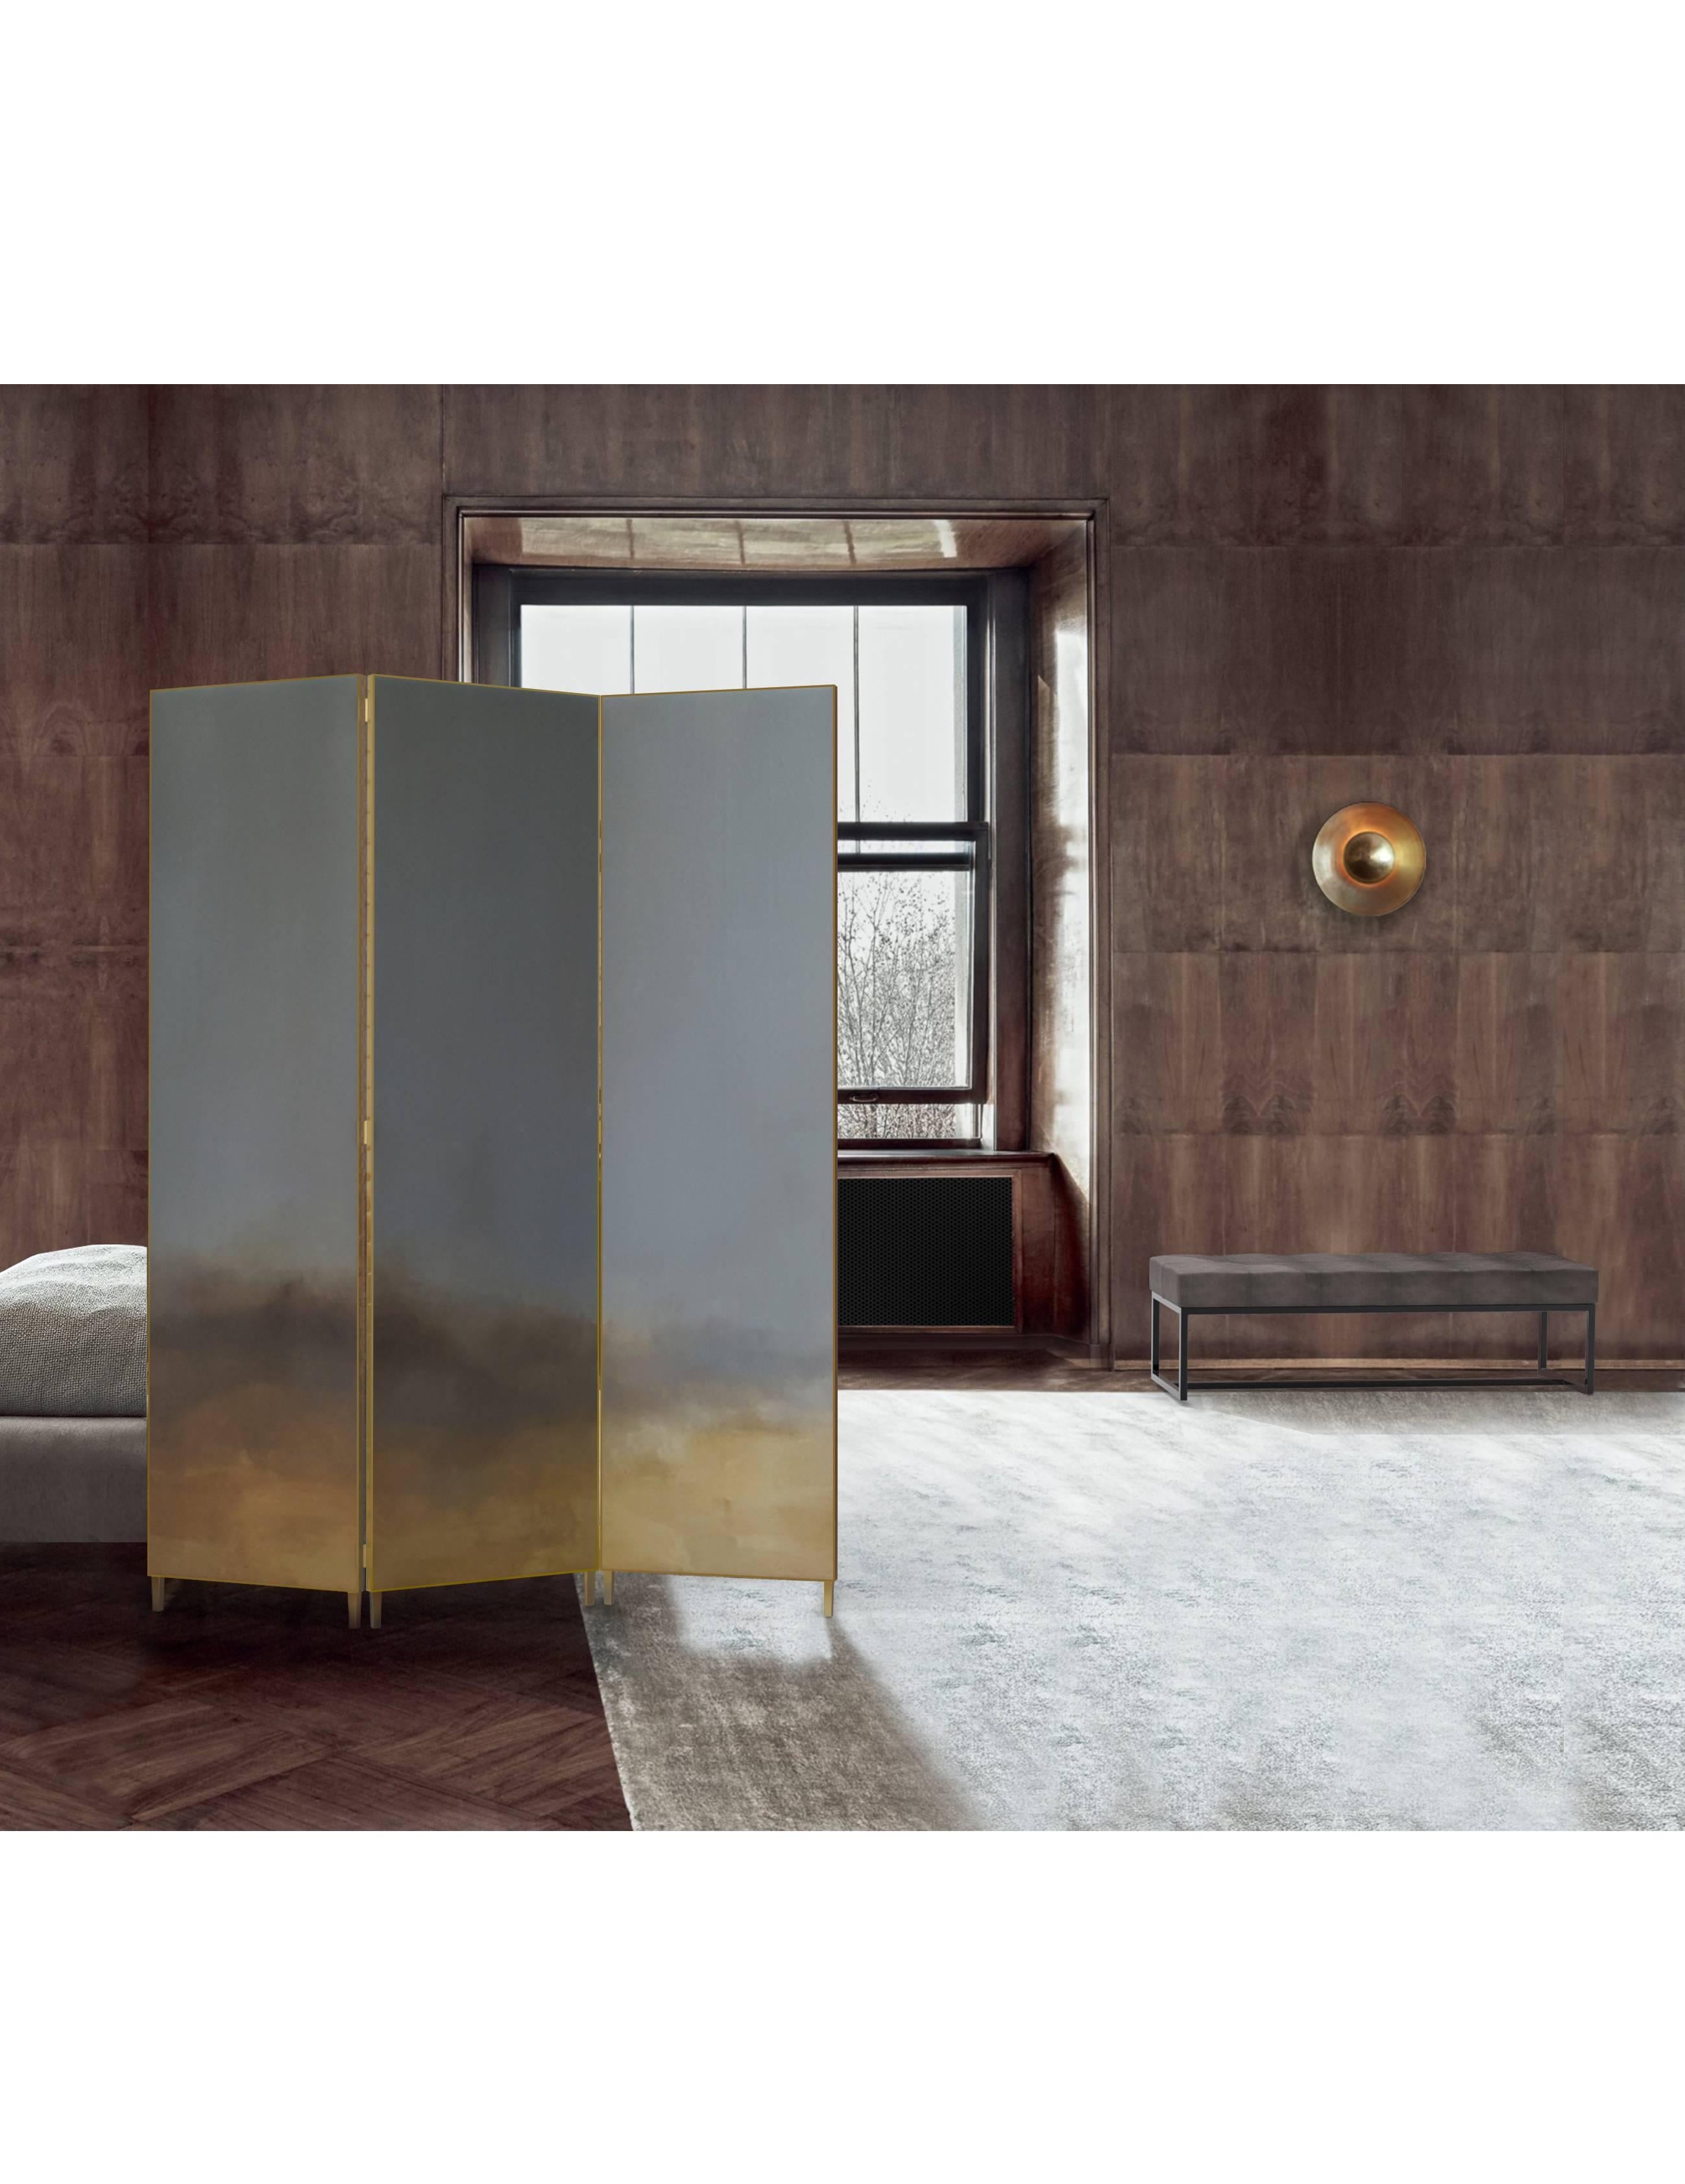 Hand-painted cloth in a full brass frame. It is delicate and beautiful solution to divide the space. Each screen is different and unusual because of the painting created by the artist. 
Full brass frame
Dimensions: 180 x 2.5 x 190cm
Each screen